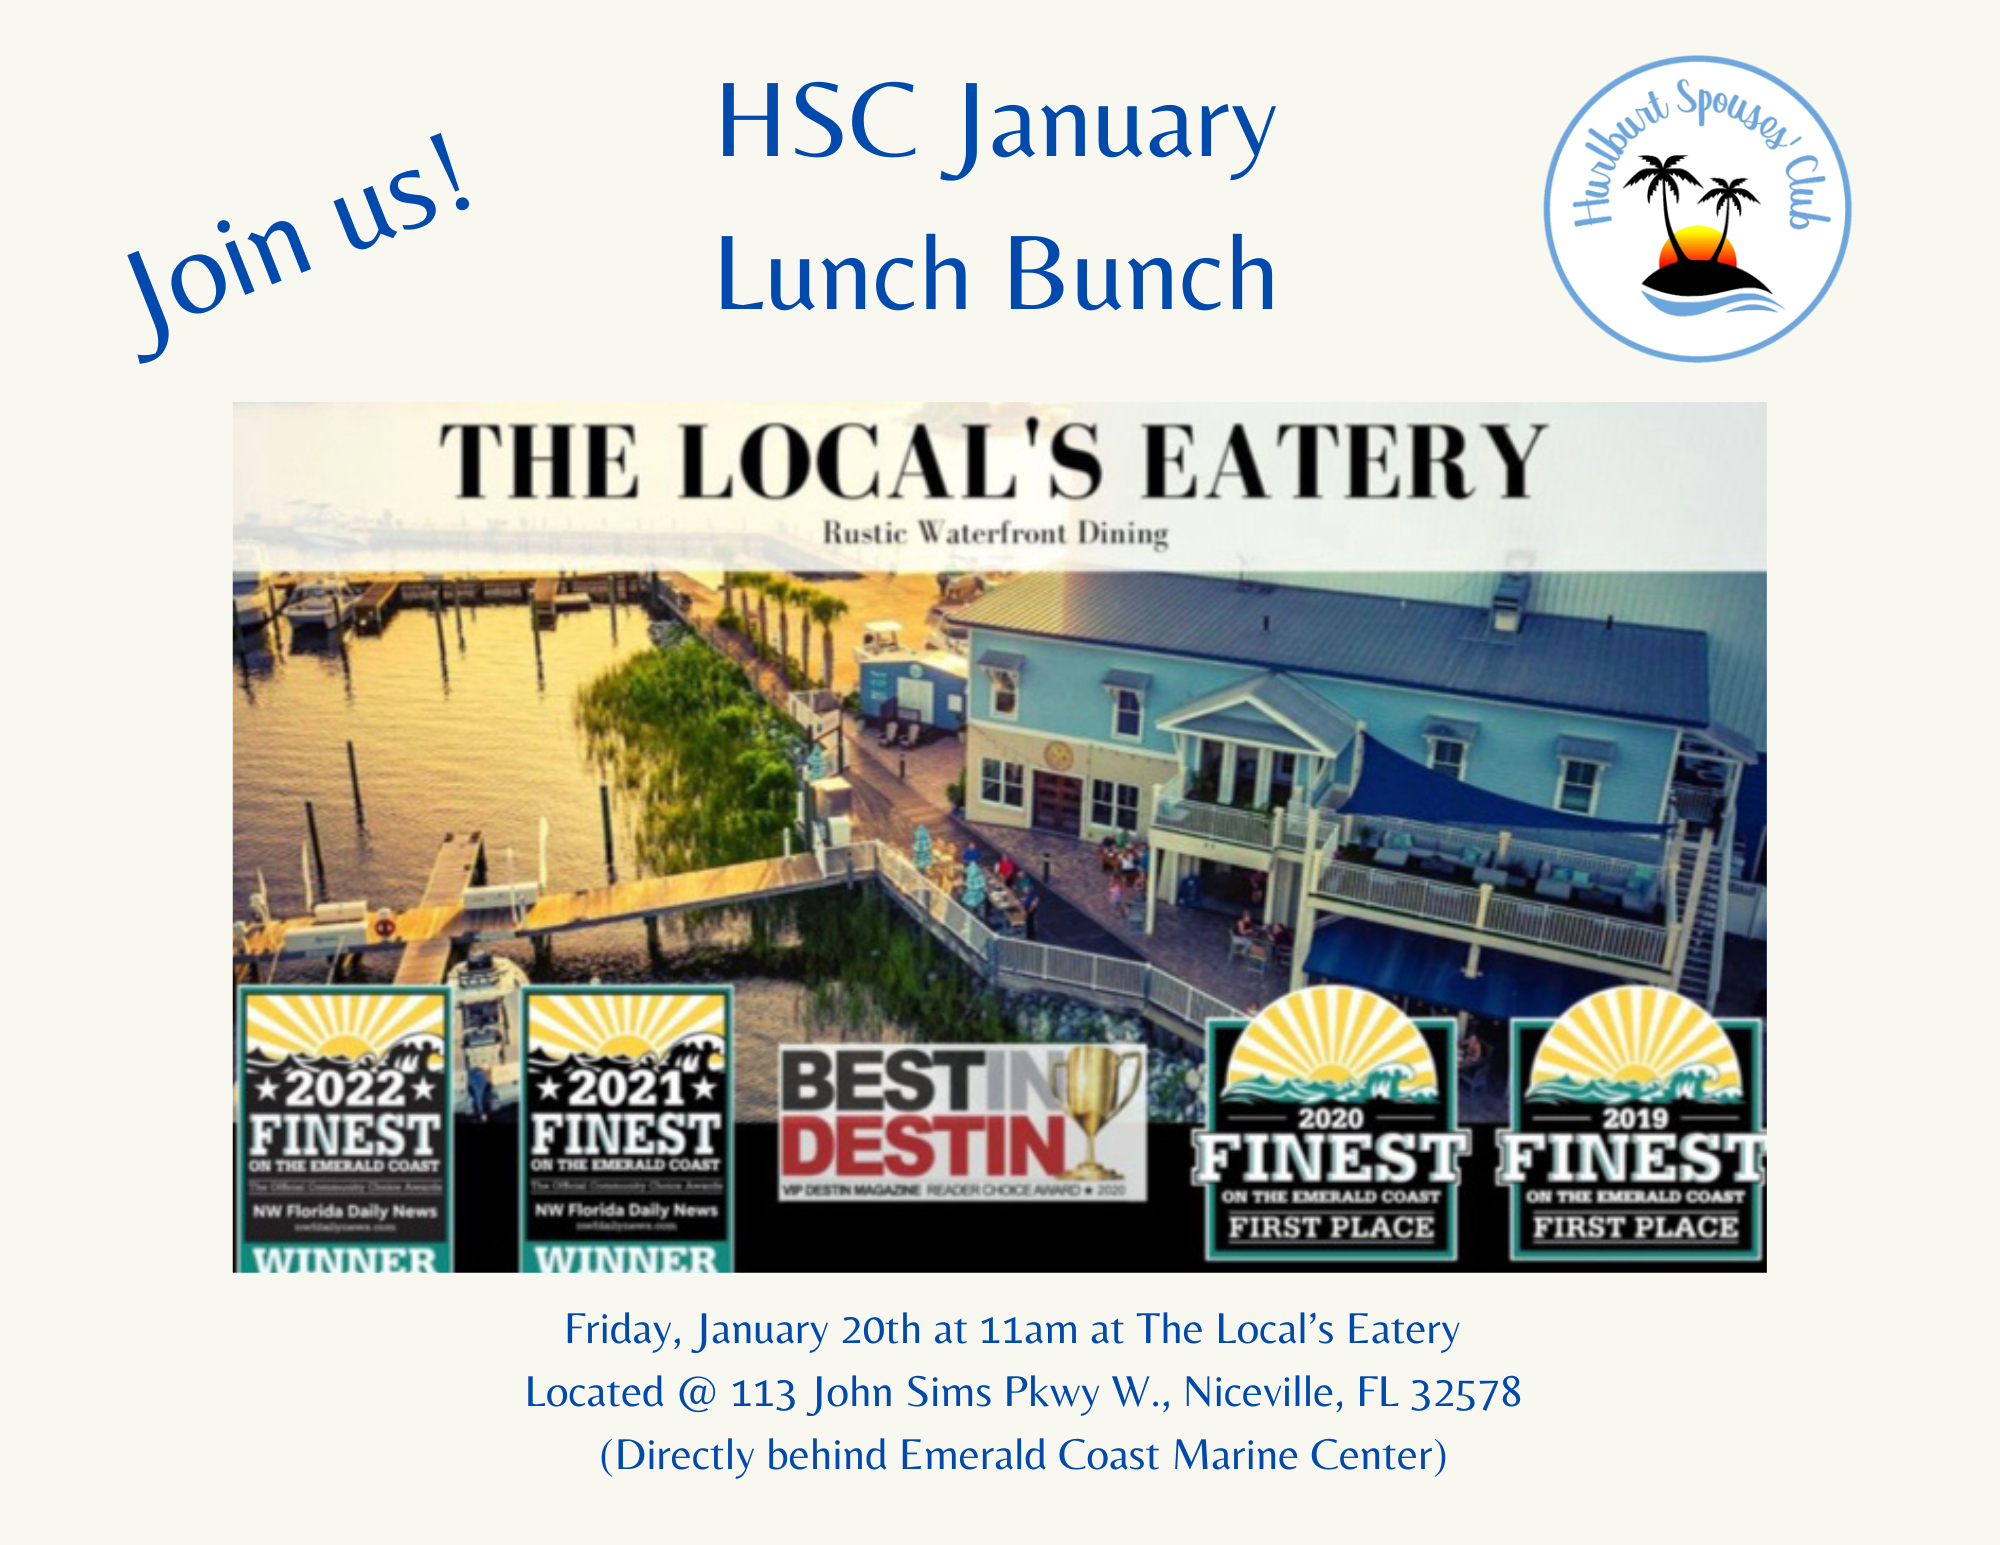 January Lunch Bunch is January 20th at The Local's Eatery!